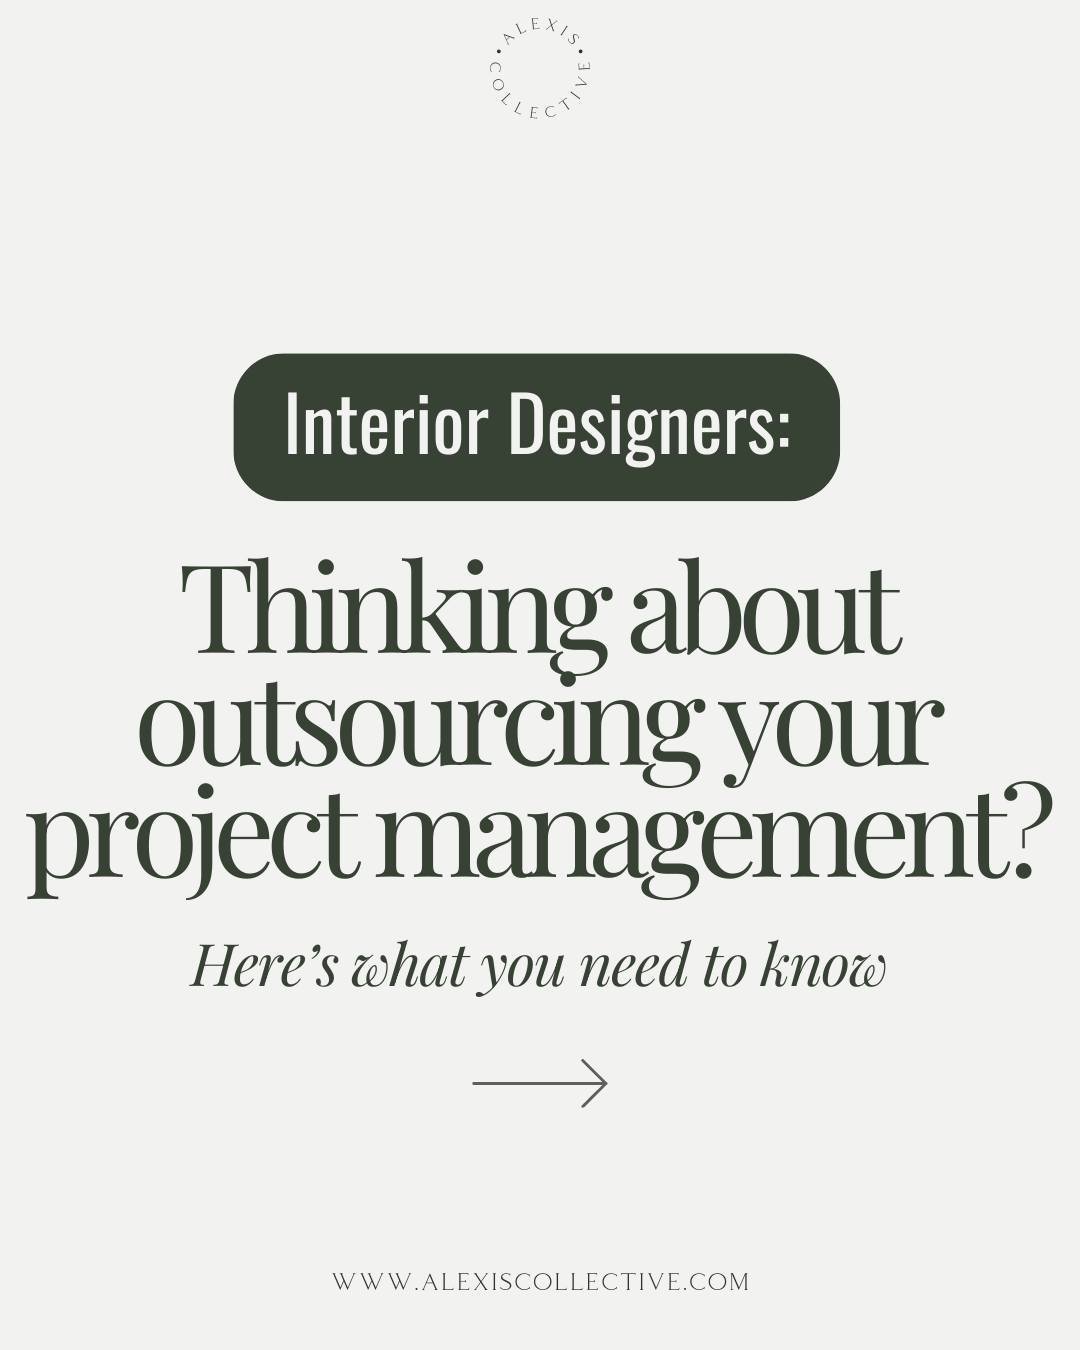 Interior Designers! Are you feeling overwhelmed, or like you just don't quite have a handle on the laundry list of tasks that come with each new project? ⁠
⁠
Our project management services are meant to ease the stress of overwhelming workloads, and 